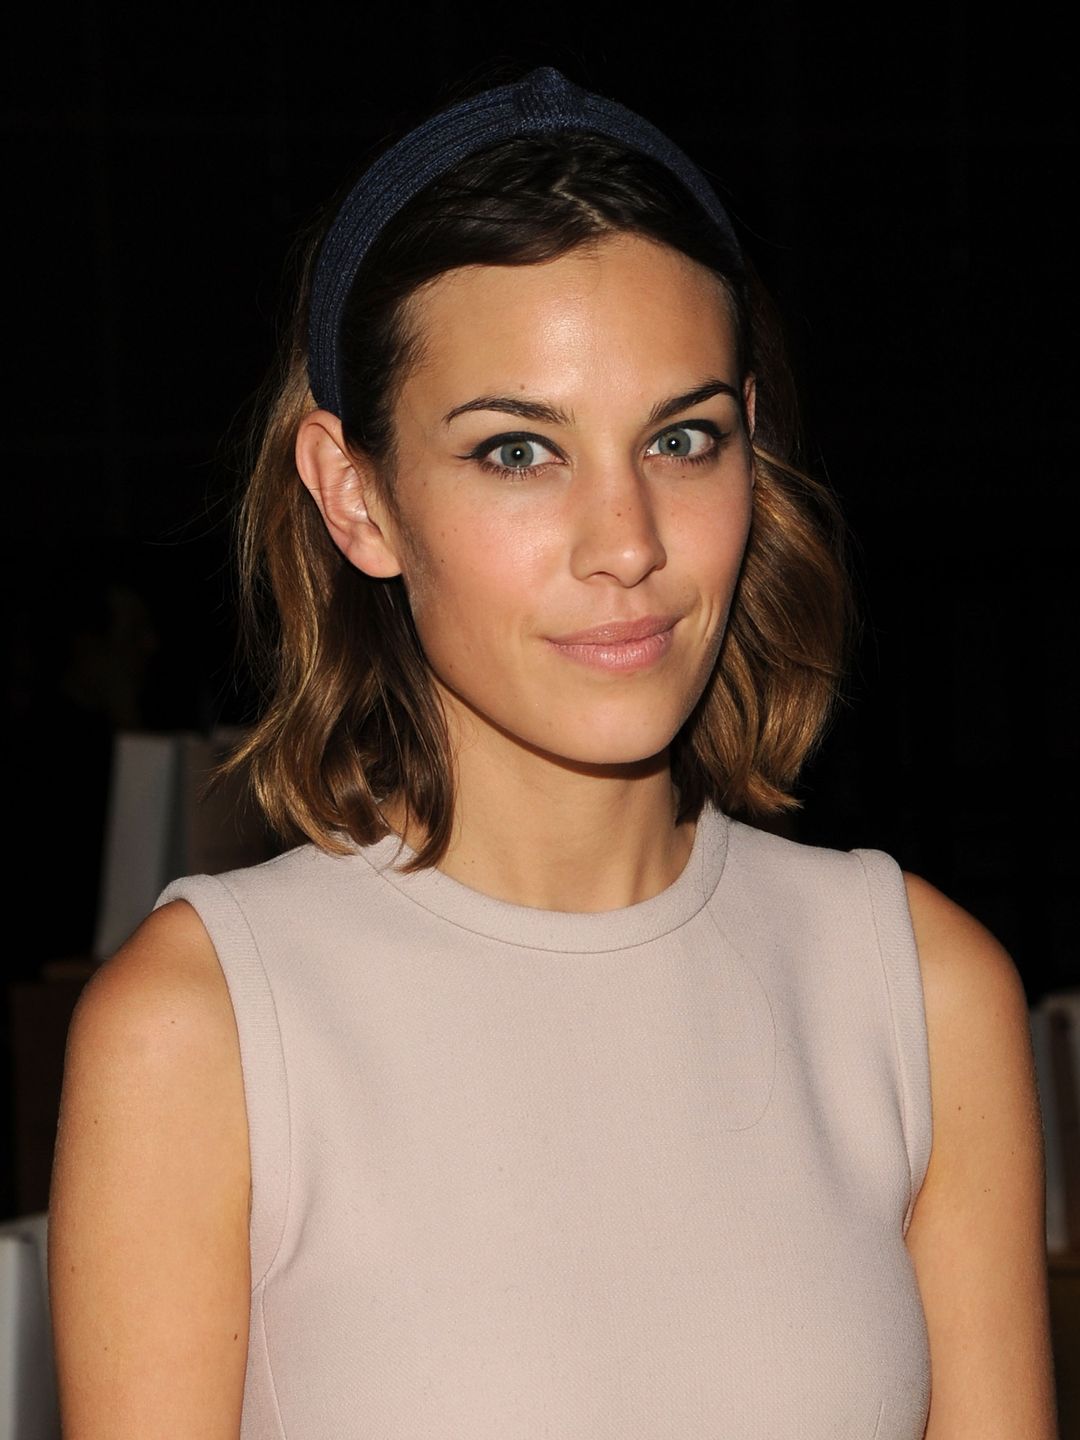 Alexa Chung attends the Marc Jacobs SS11 Show at NYState Armony, 68 Lex on September 13, 2010 in a nude dress and headband